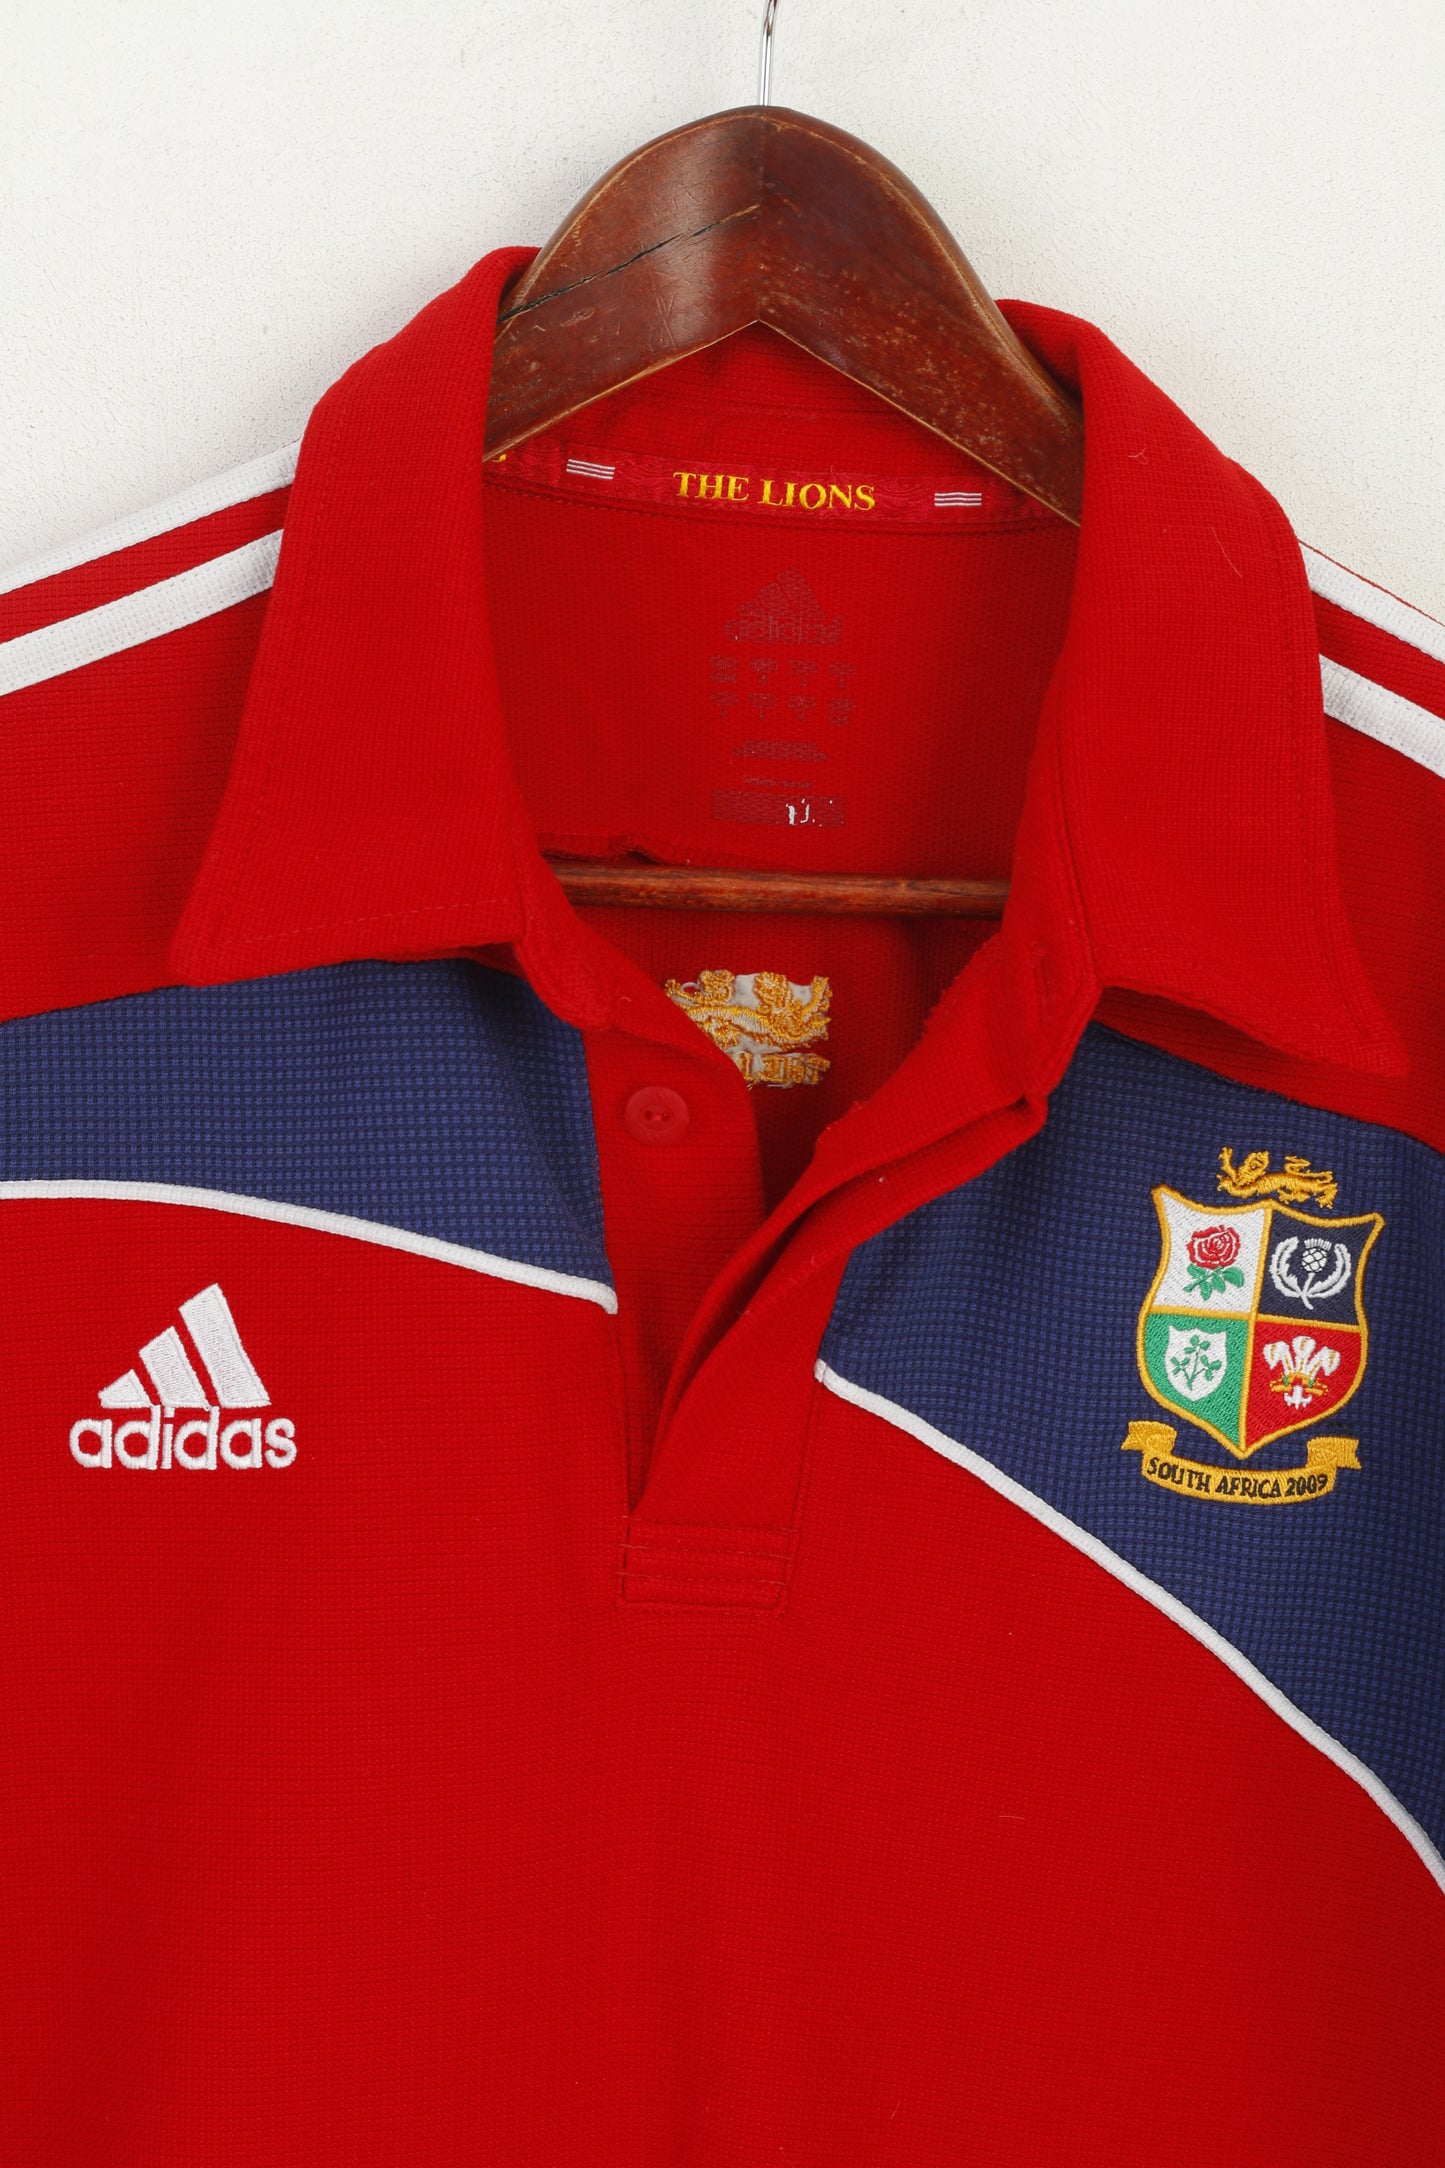 Adidas Men M Shirt Red The Lions South Africa 2009 Rugby Jersey Sport Top